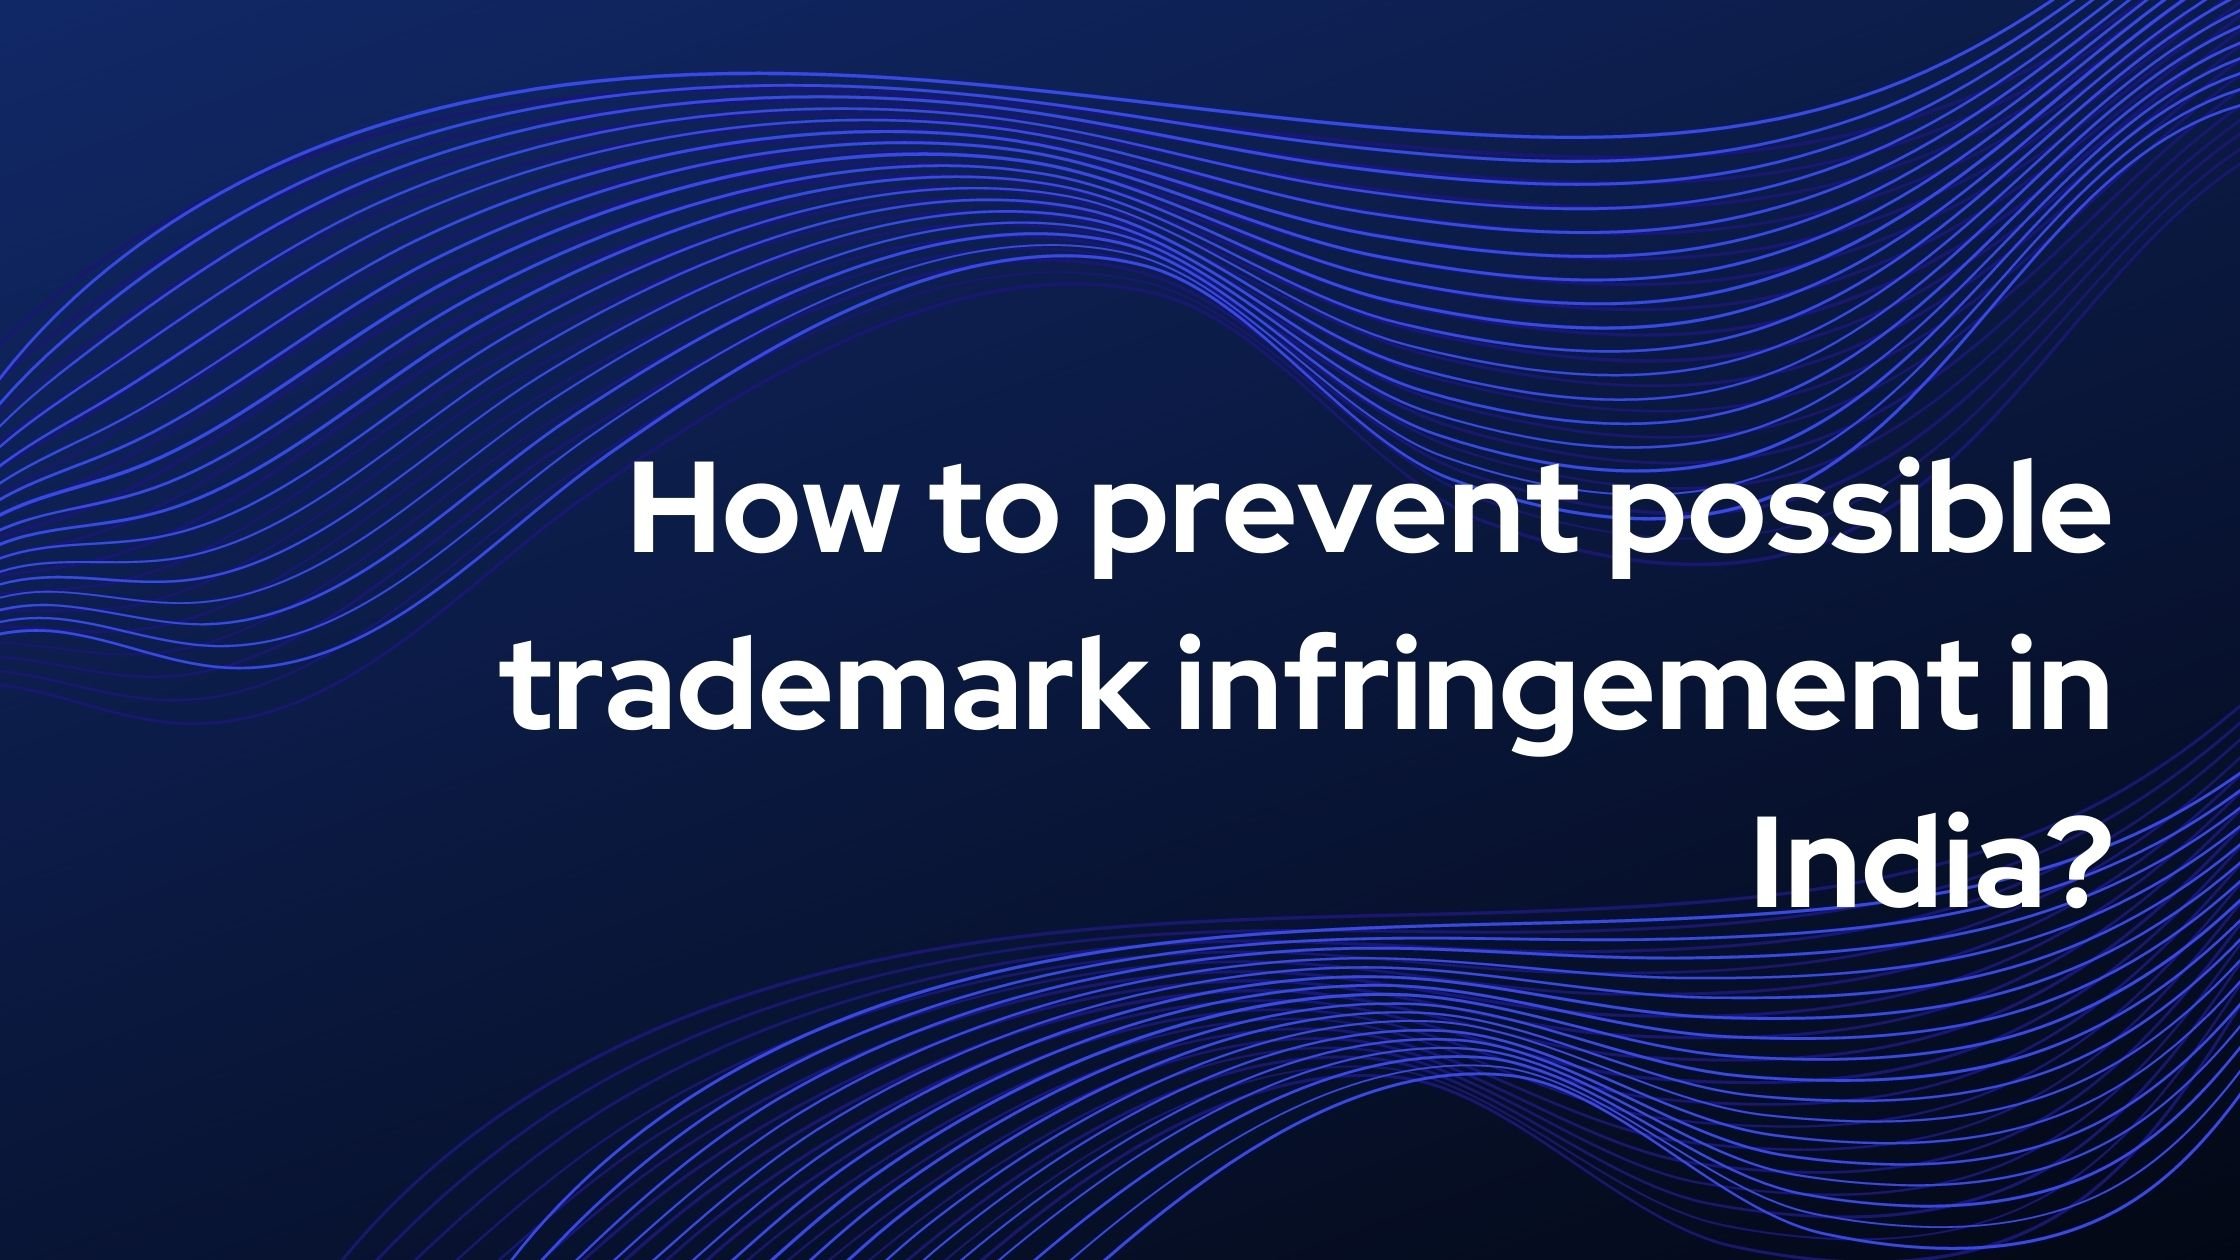 How to prevent possible trademark infringement in India?